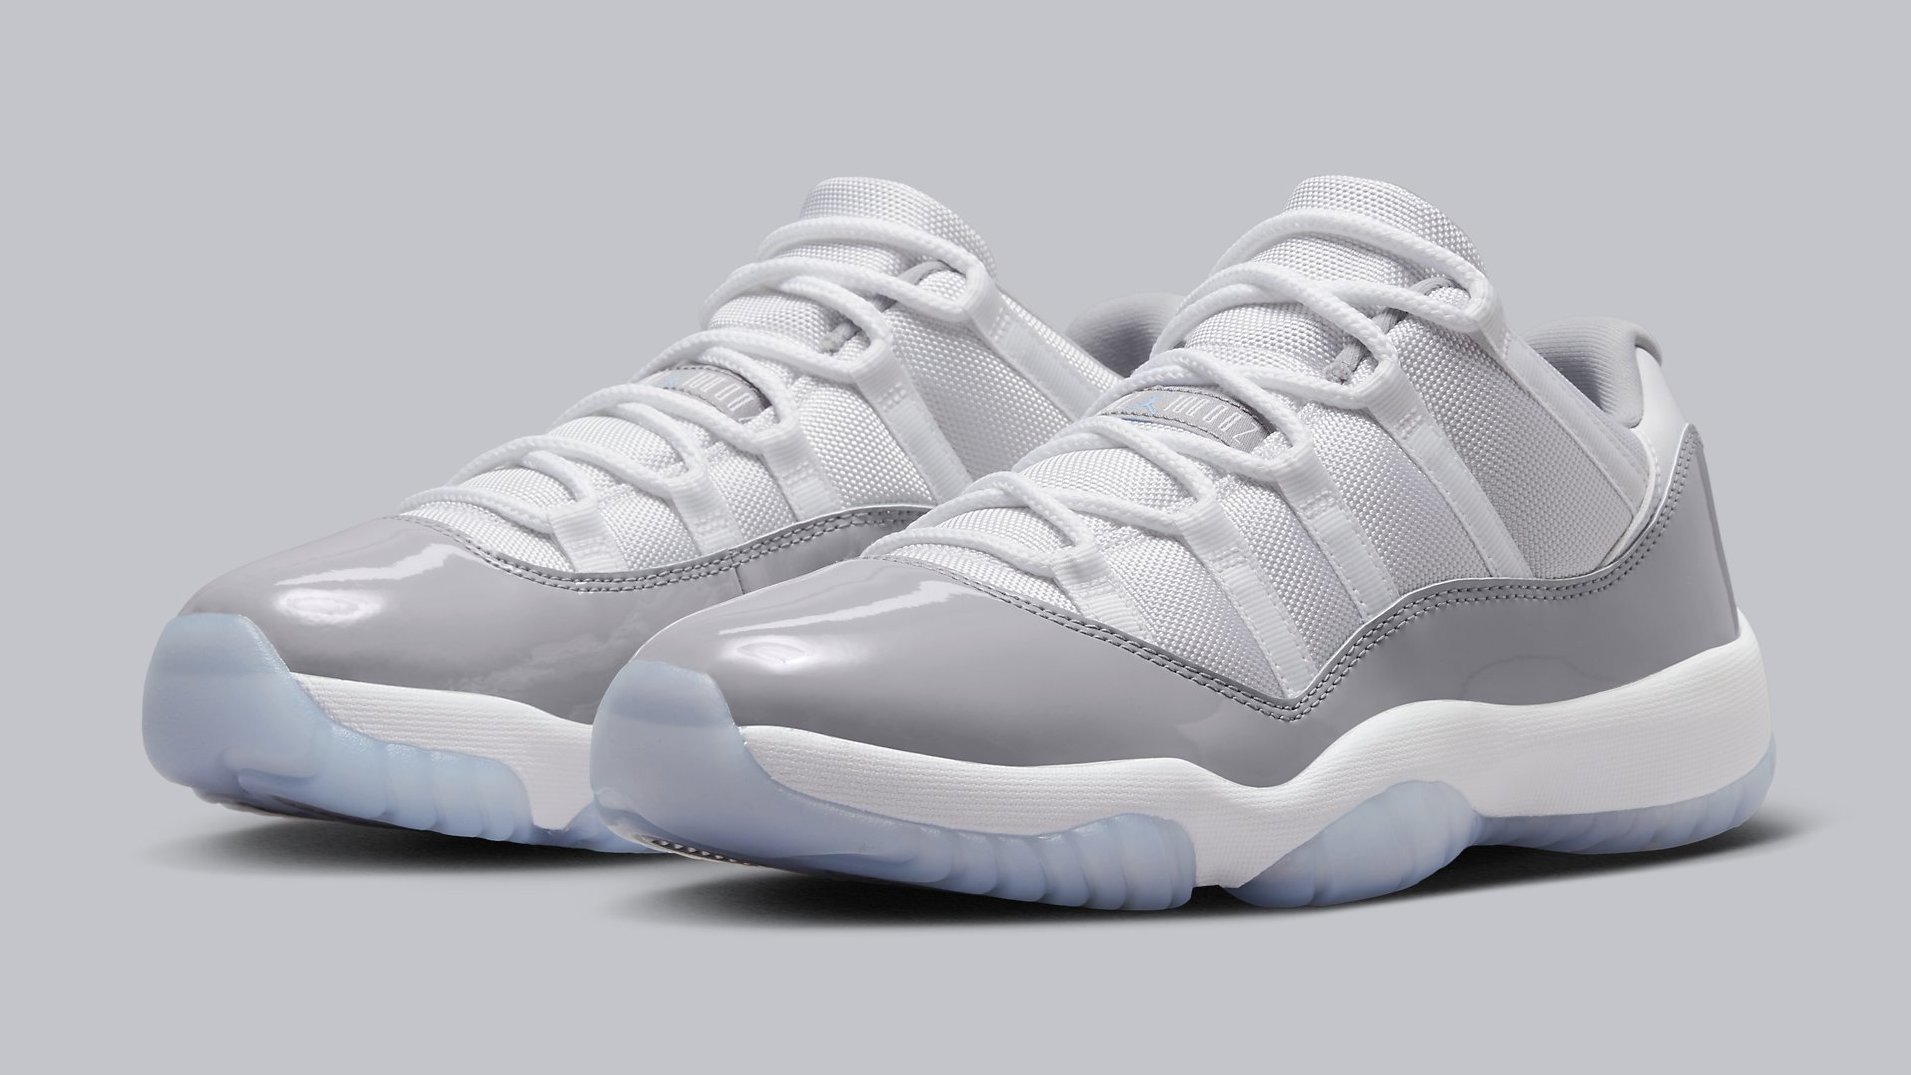 Best Look Yet at the 'Cement Grey' Air Jordan 11 Low | Complex